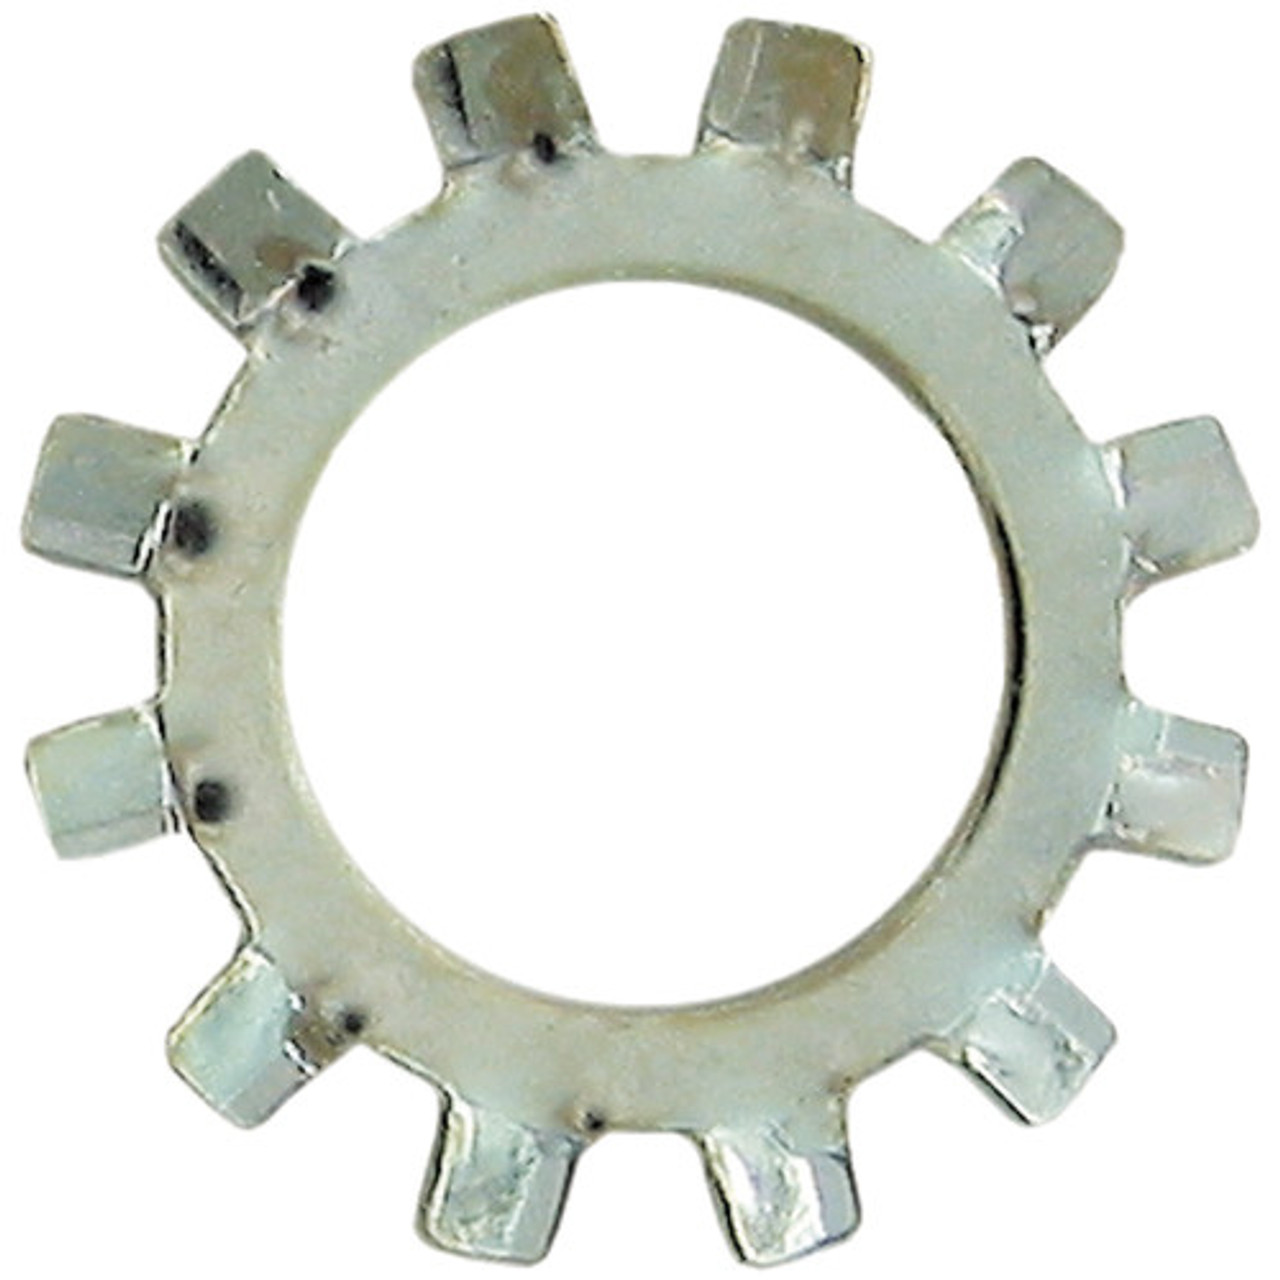 1" Zinc Plated External Tooth Lock Washer 2000 Pc.   B161-136